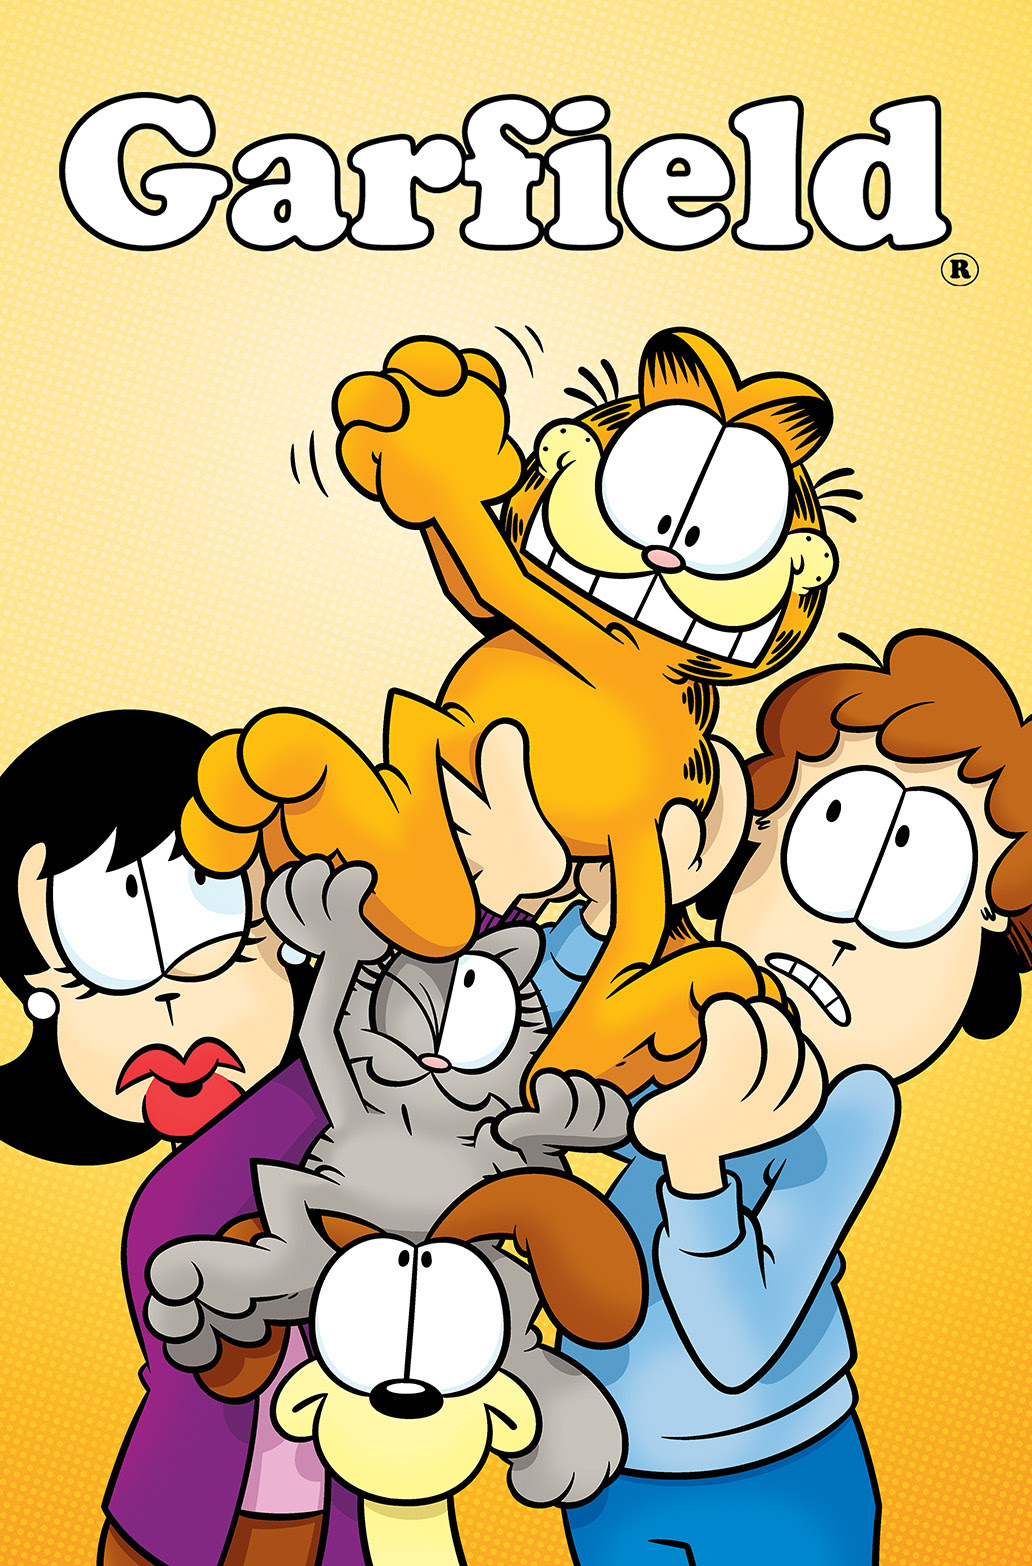 GARFIELD #29 Cover by Andy Hirsch